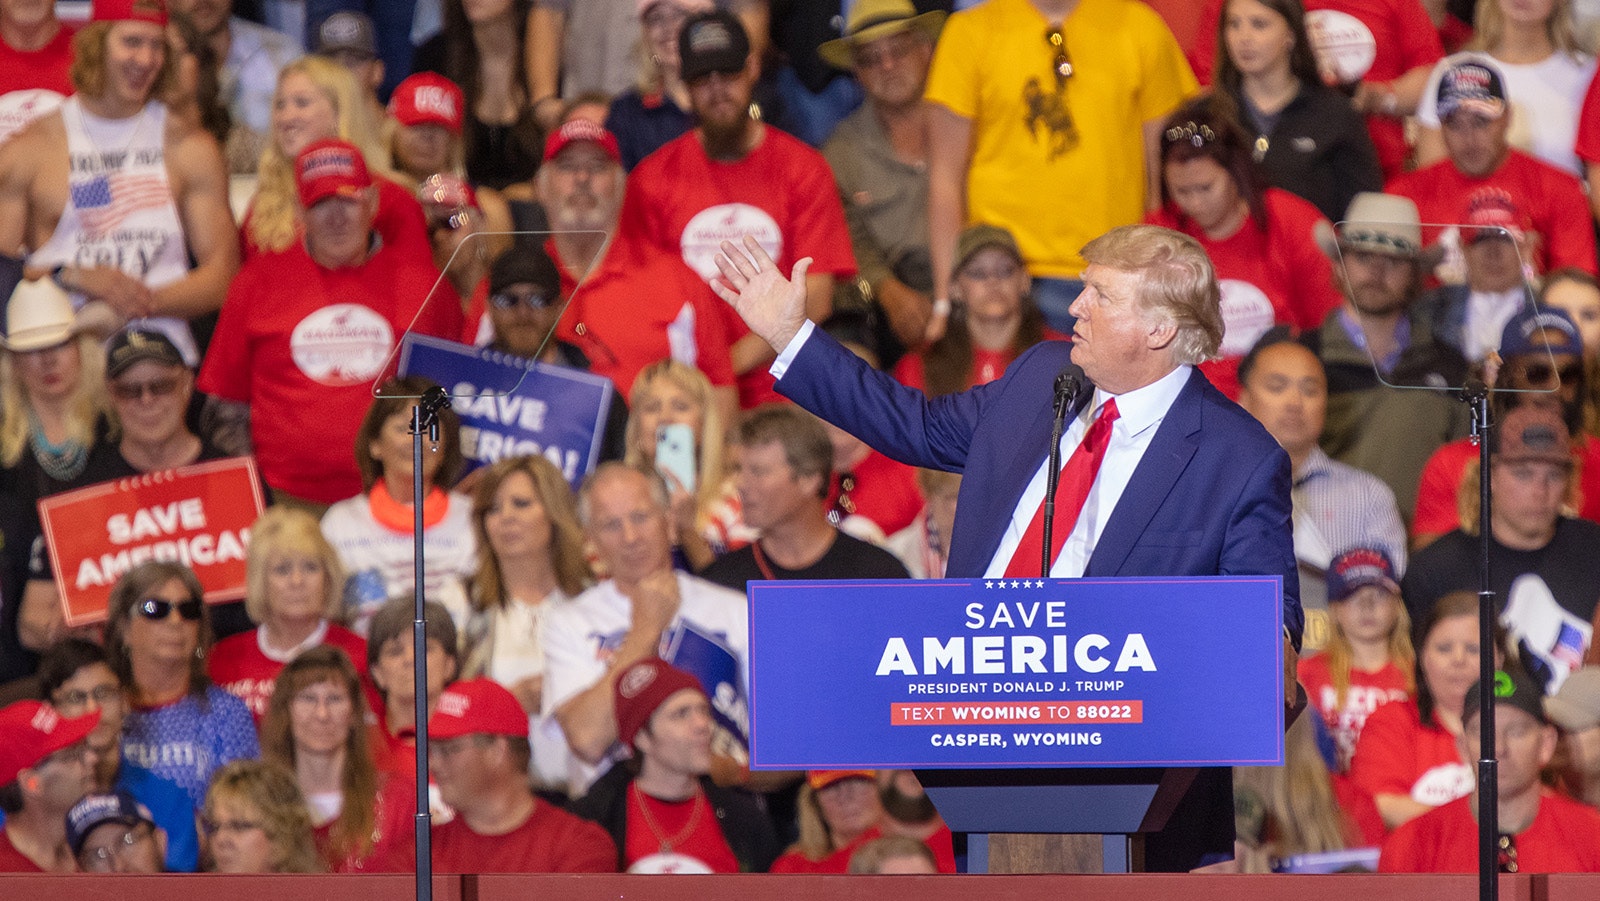 Former President Donald Trump at a Casper, Wyoming, rally in May 2022.